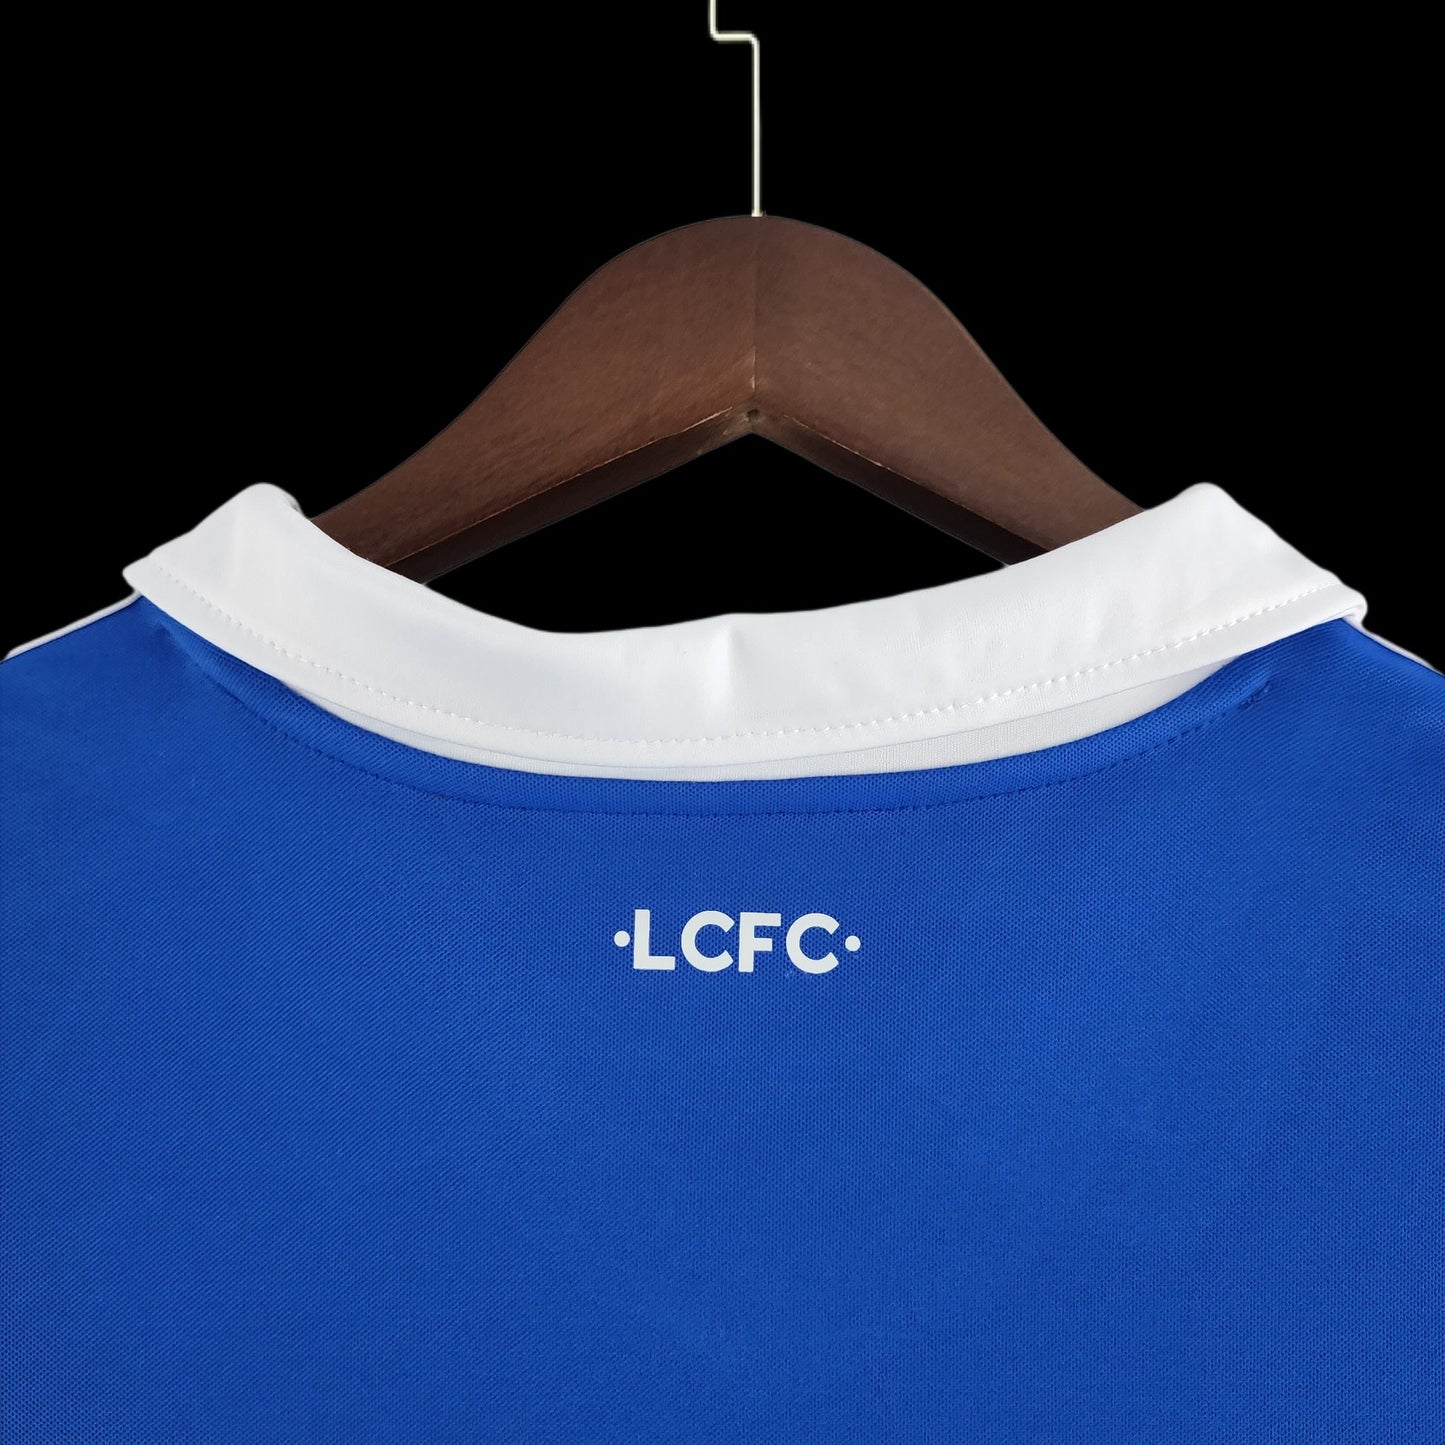 Leicester City 22/23 Home Kit